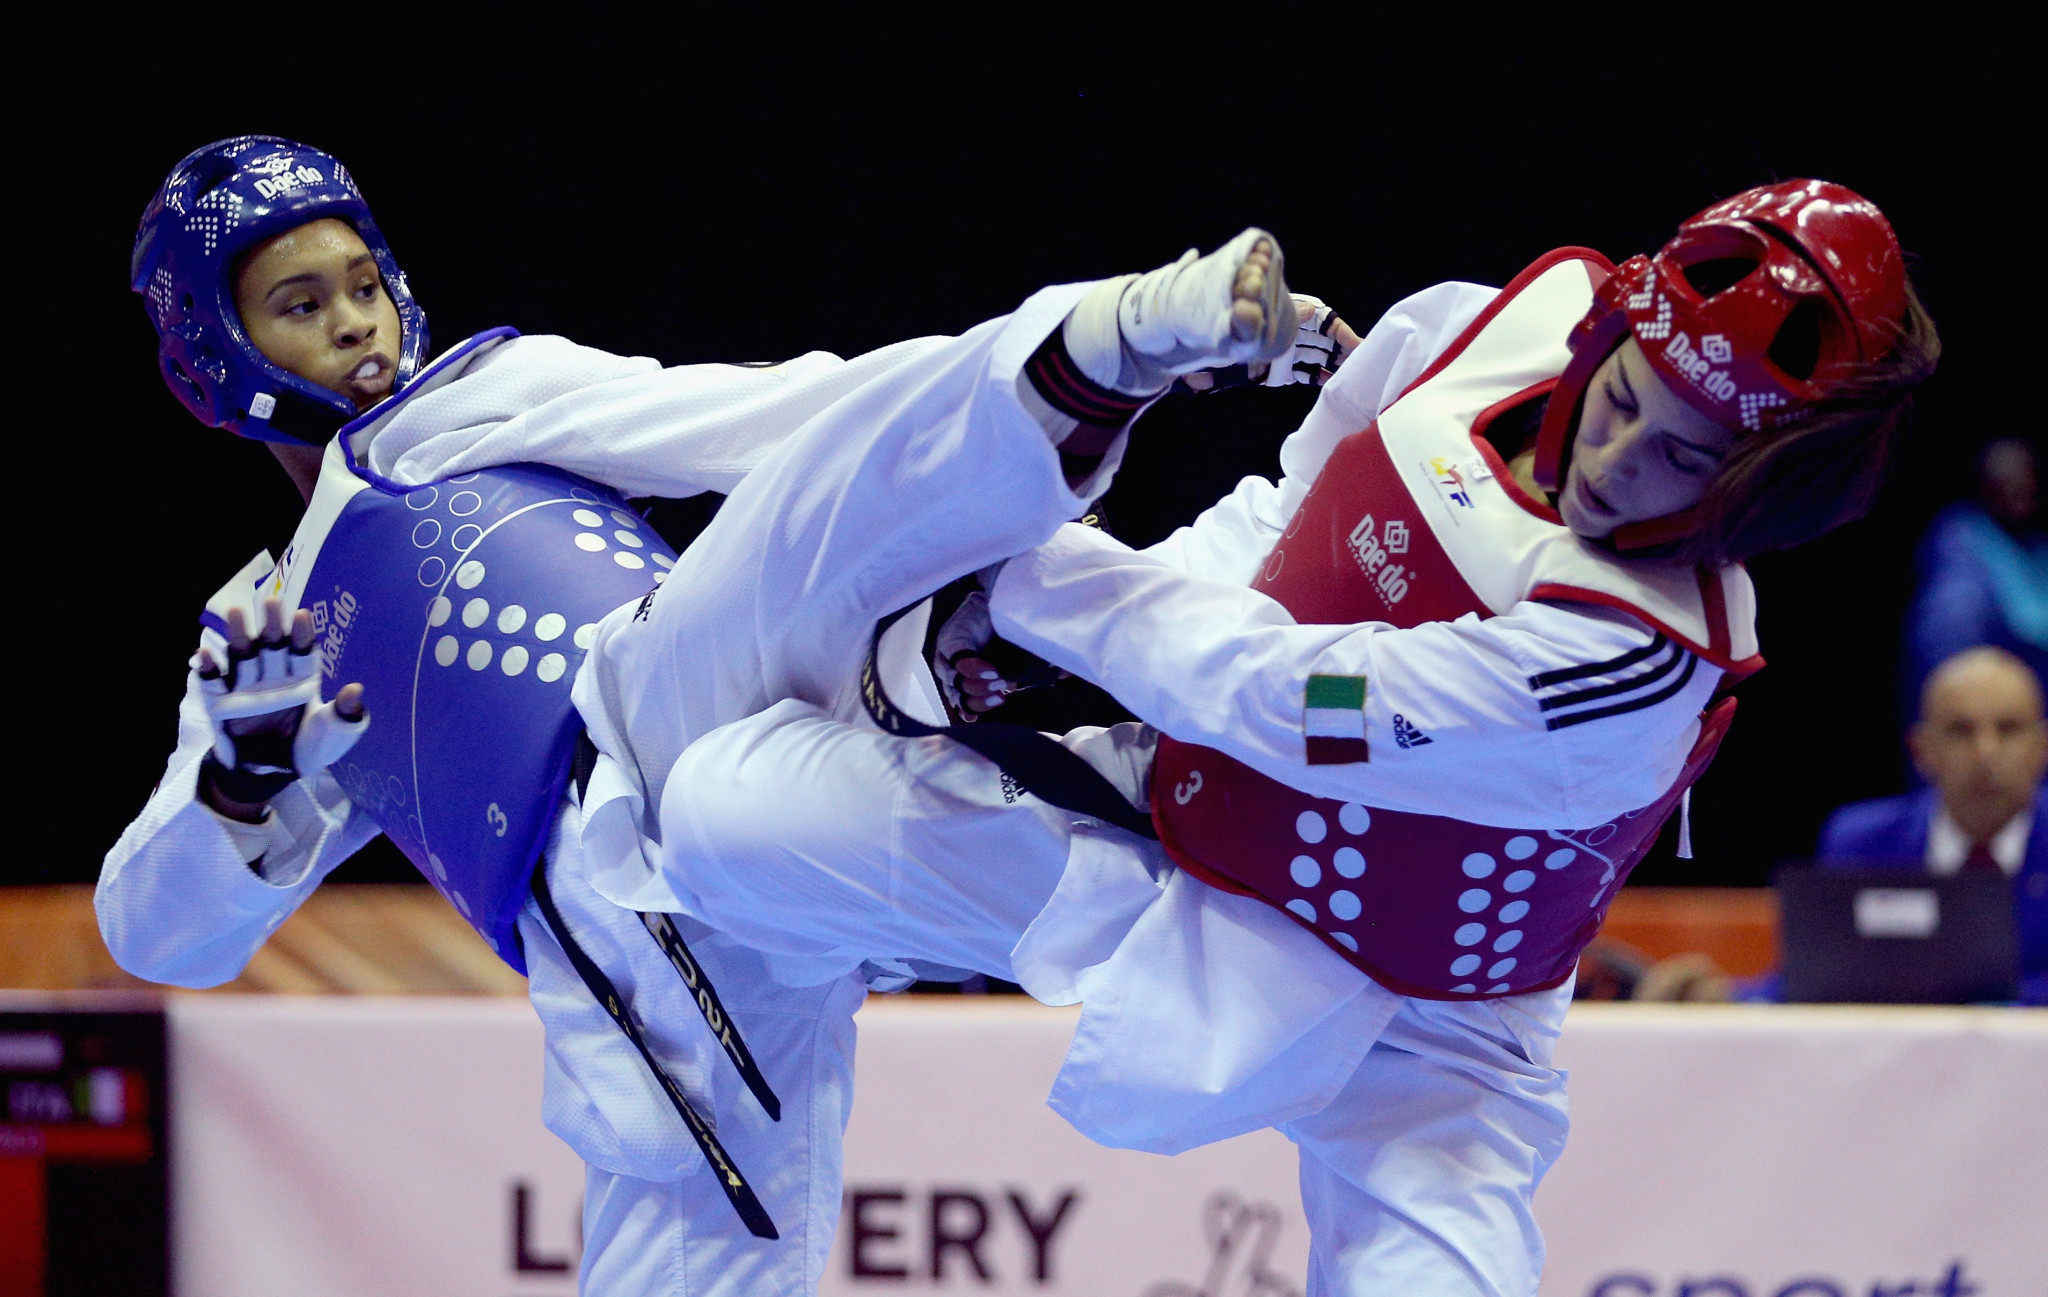 USA Taekwondo are hopeful changes to the coaching programme will help them unearth future talent in the sport ©Getty Images